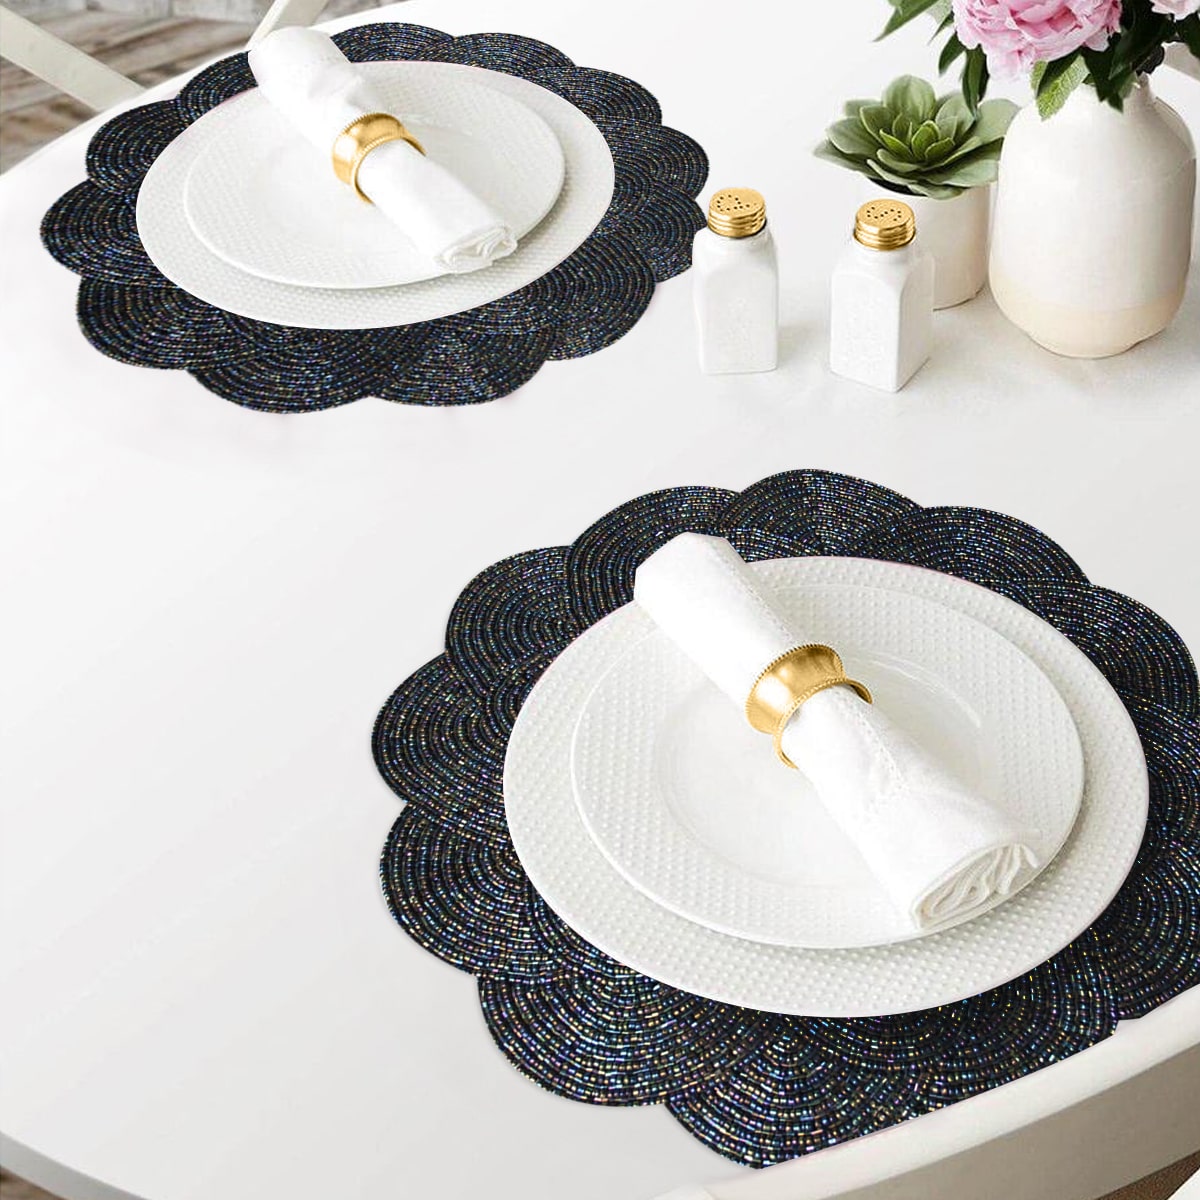 The Meribelle Beaded Placemats